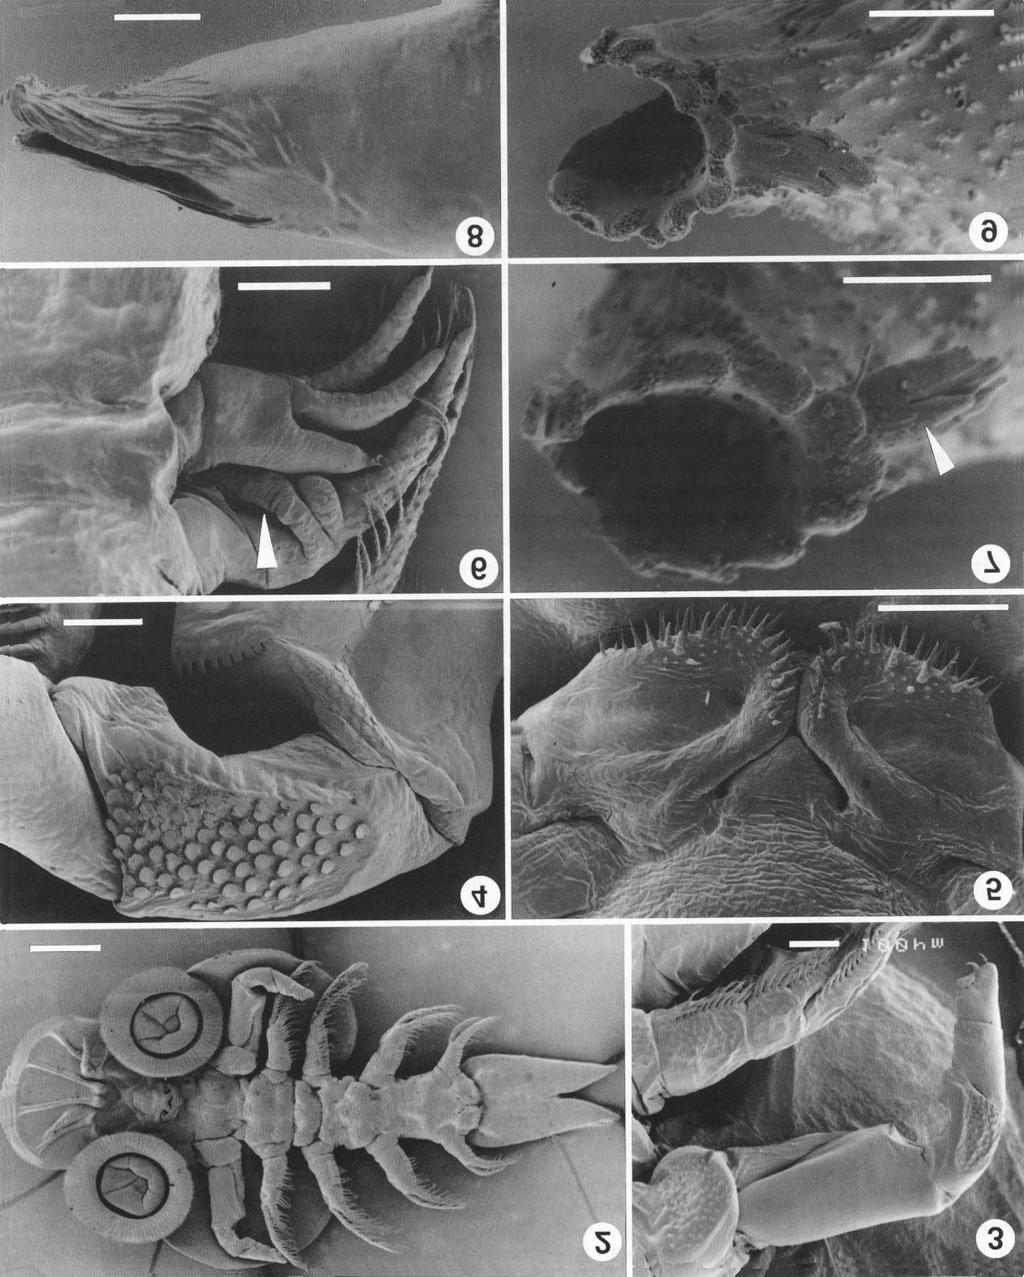 Van As, Van As: Chonopeltis spp. from South Africa Figs. 2-9. Scanning electron micrographs of Chonopeltis australis. Fig. 2. Adult female, ventral view. Fig. 3. Maxilla. Fig. 4.